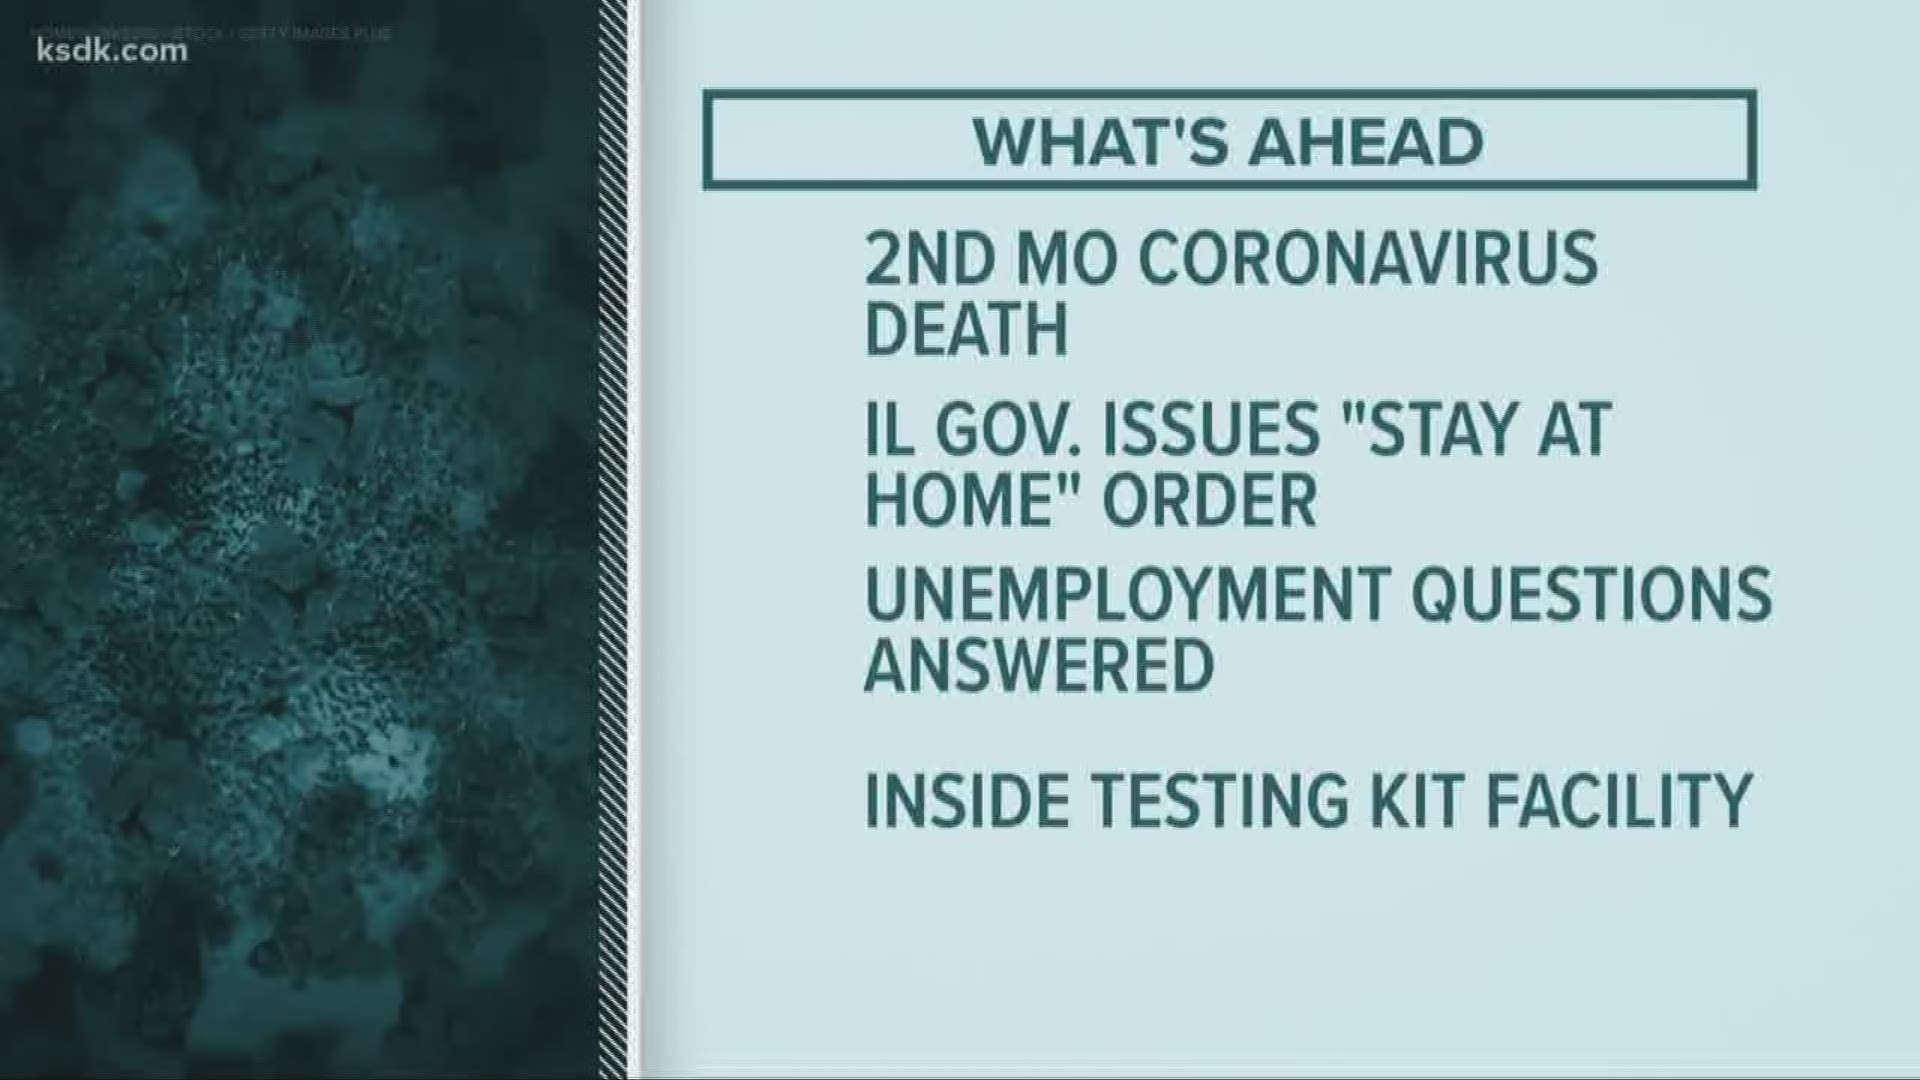 Governors in Missouri and Illinois released new updates on coronavirus in the bi-state. Illinois also is enacting a stay-at-home order.